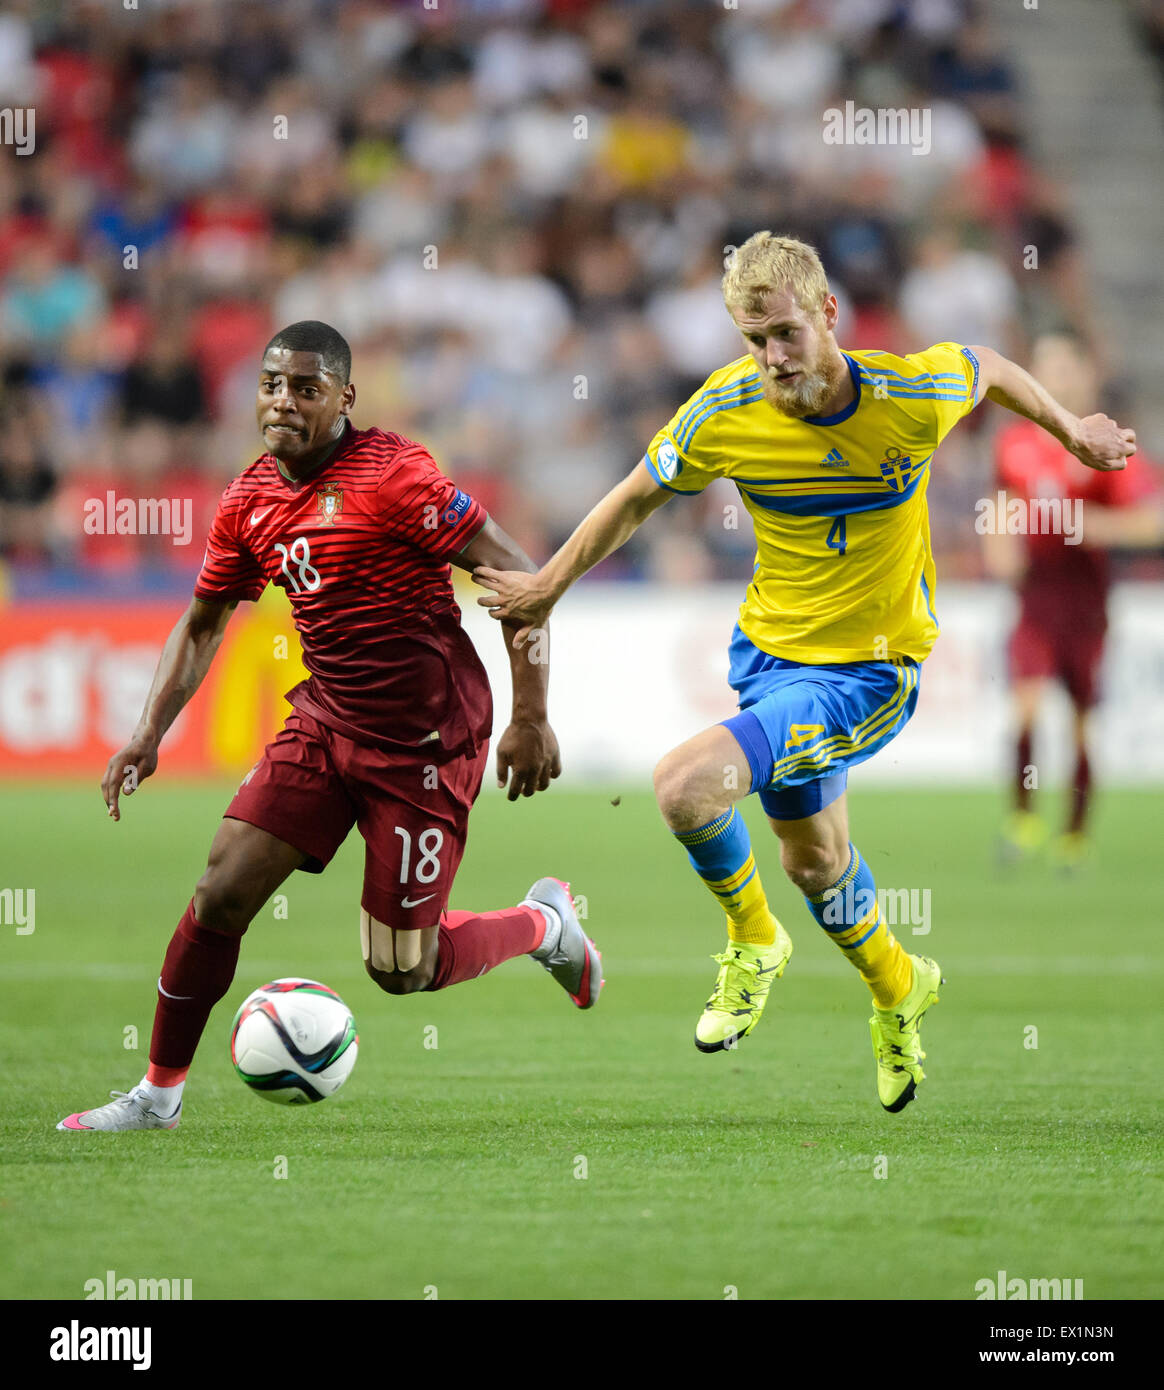 Prague, Czech Republic. 30th June, 2015. Portugal's Ivan Cavaleiro (red) and Sweden's Filip Helander vie for the ball during the UEFA Under-21 European Championships 2015 final soccer match between Sweden and Portugal in Prague, Czech Republic, 30 June 2015. Photo: Thomas Eisenhuth/dpa - NO WIRE SERVICE -/dpa/Alamy Live News Stock Photo